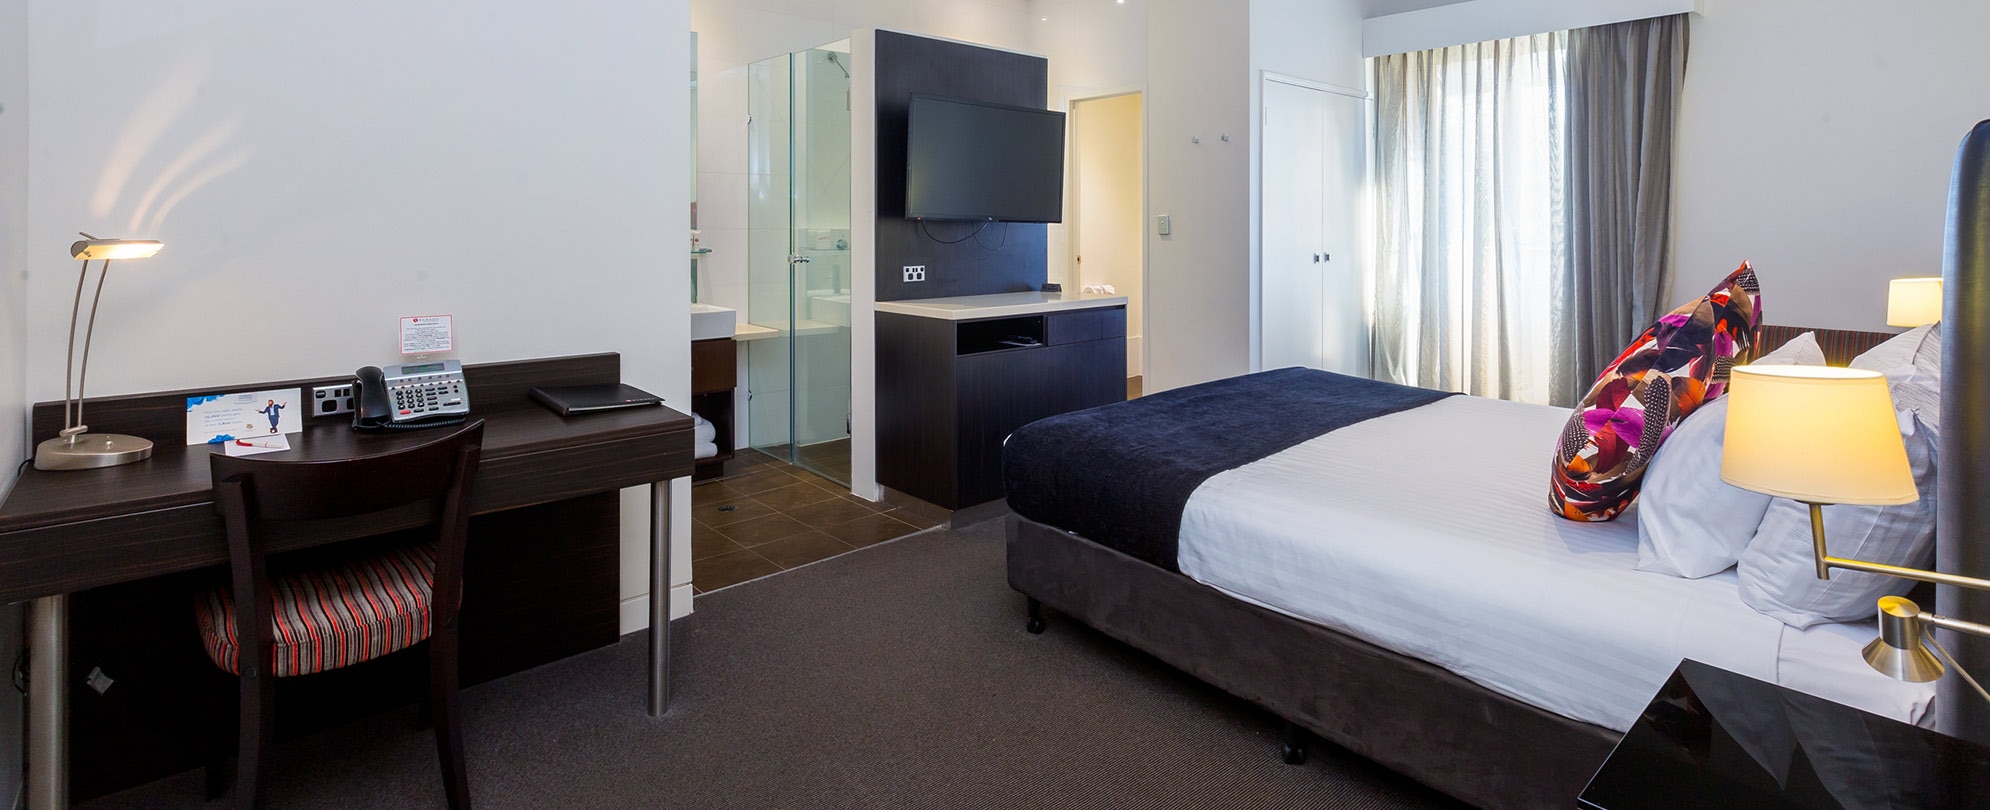 A desk, bed, and mounted tv inside a studio suite at Club Wyndham Perth